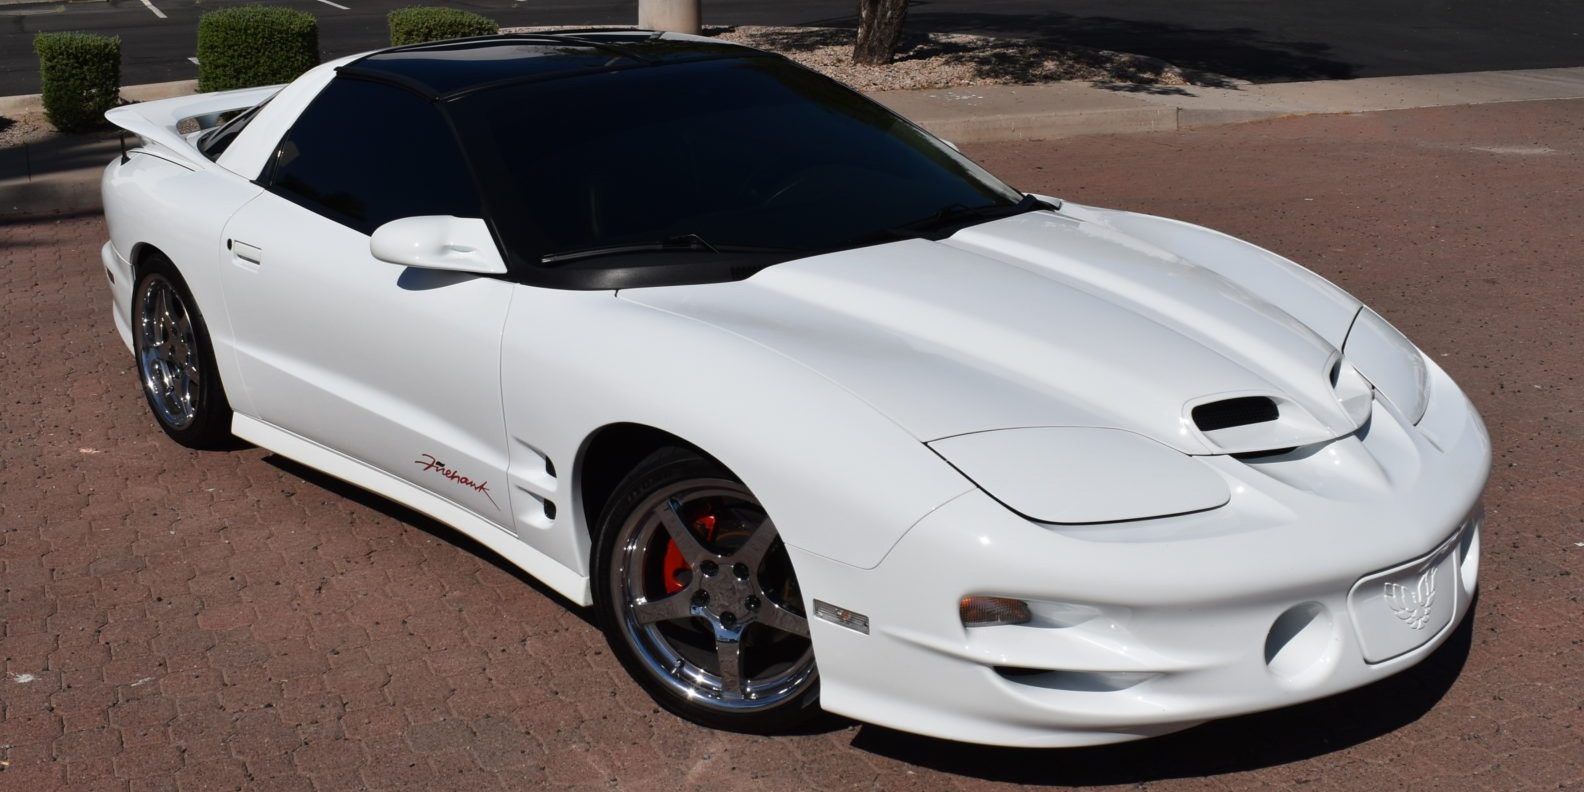 10 Reasons Why The 2002 Pontiac Firebird Is An Underrated Muscle Car